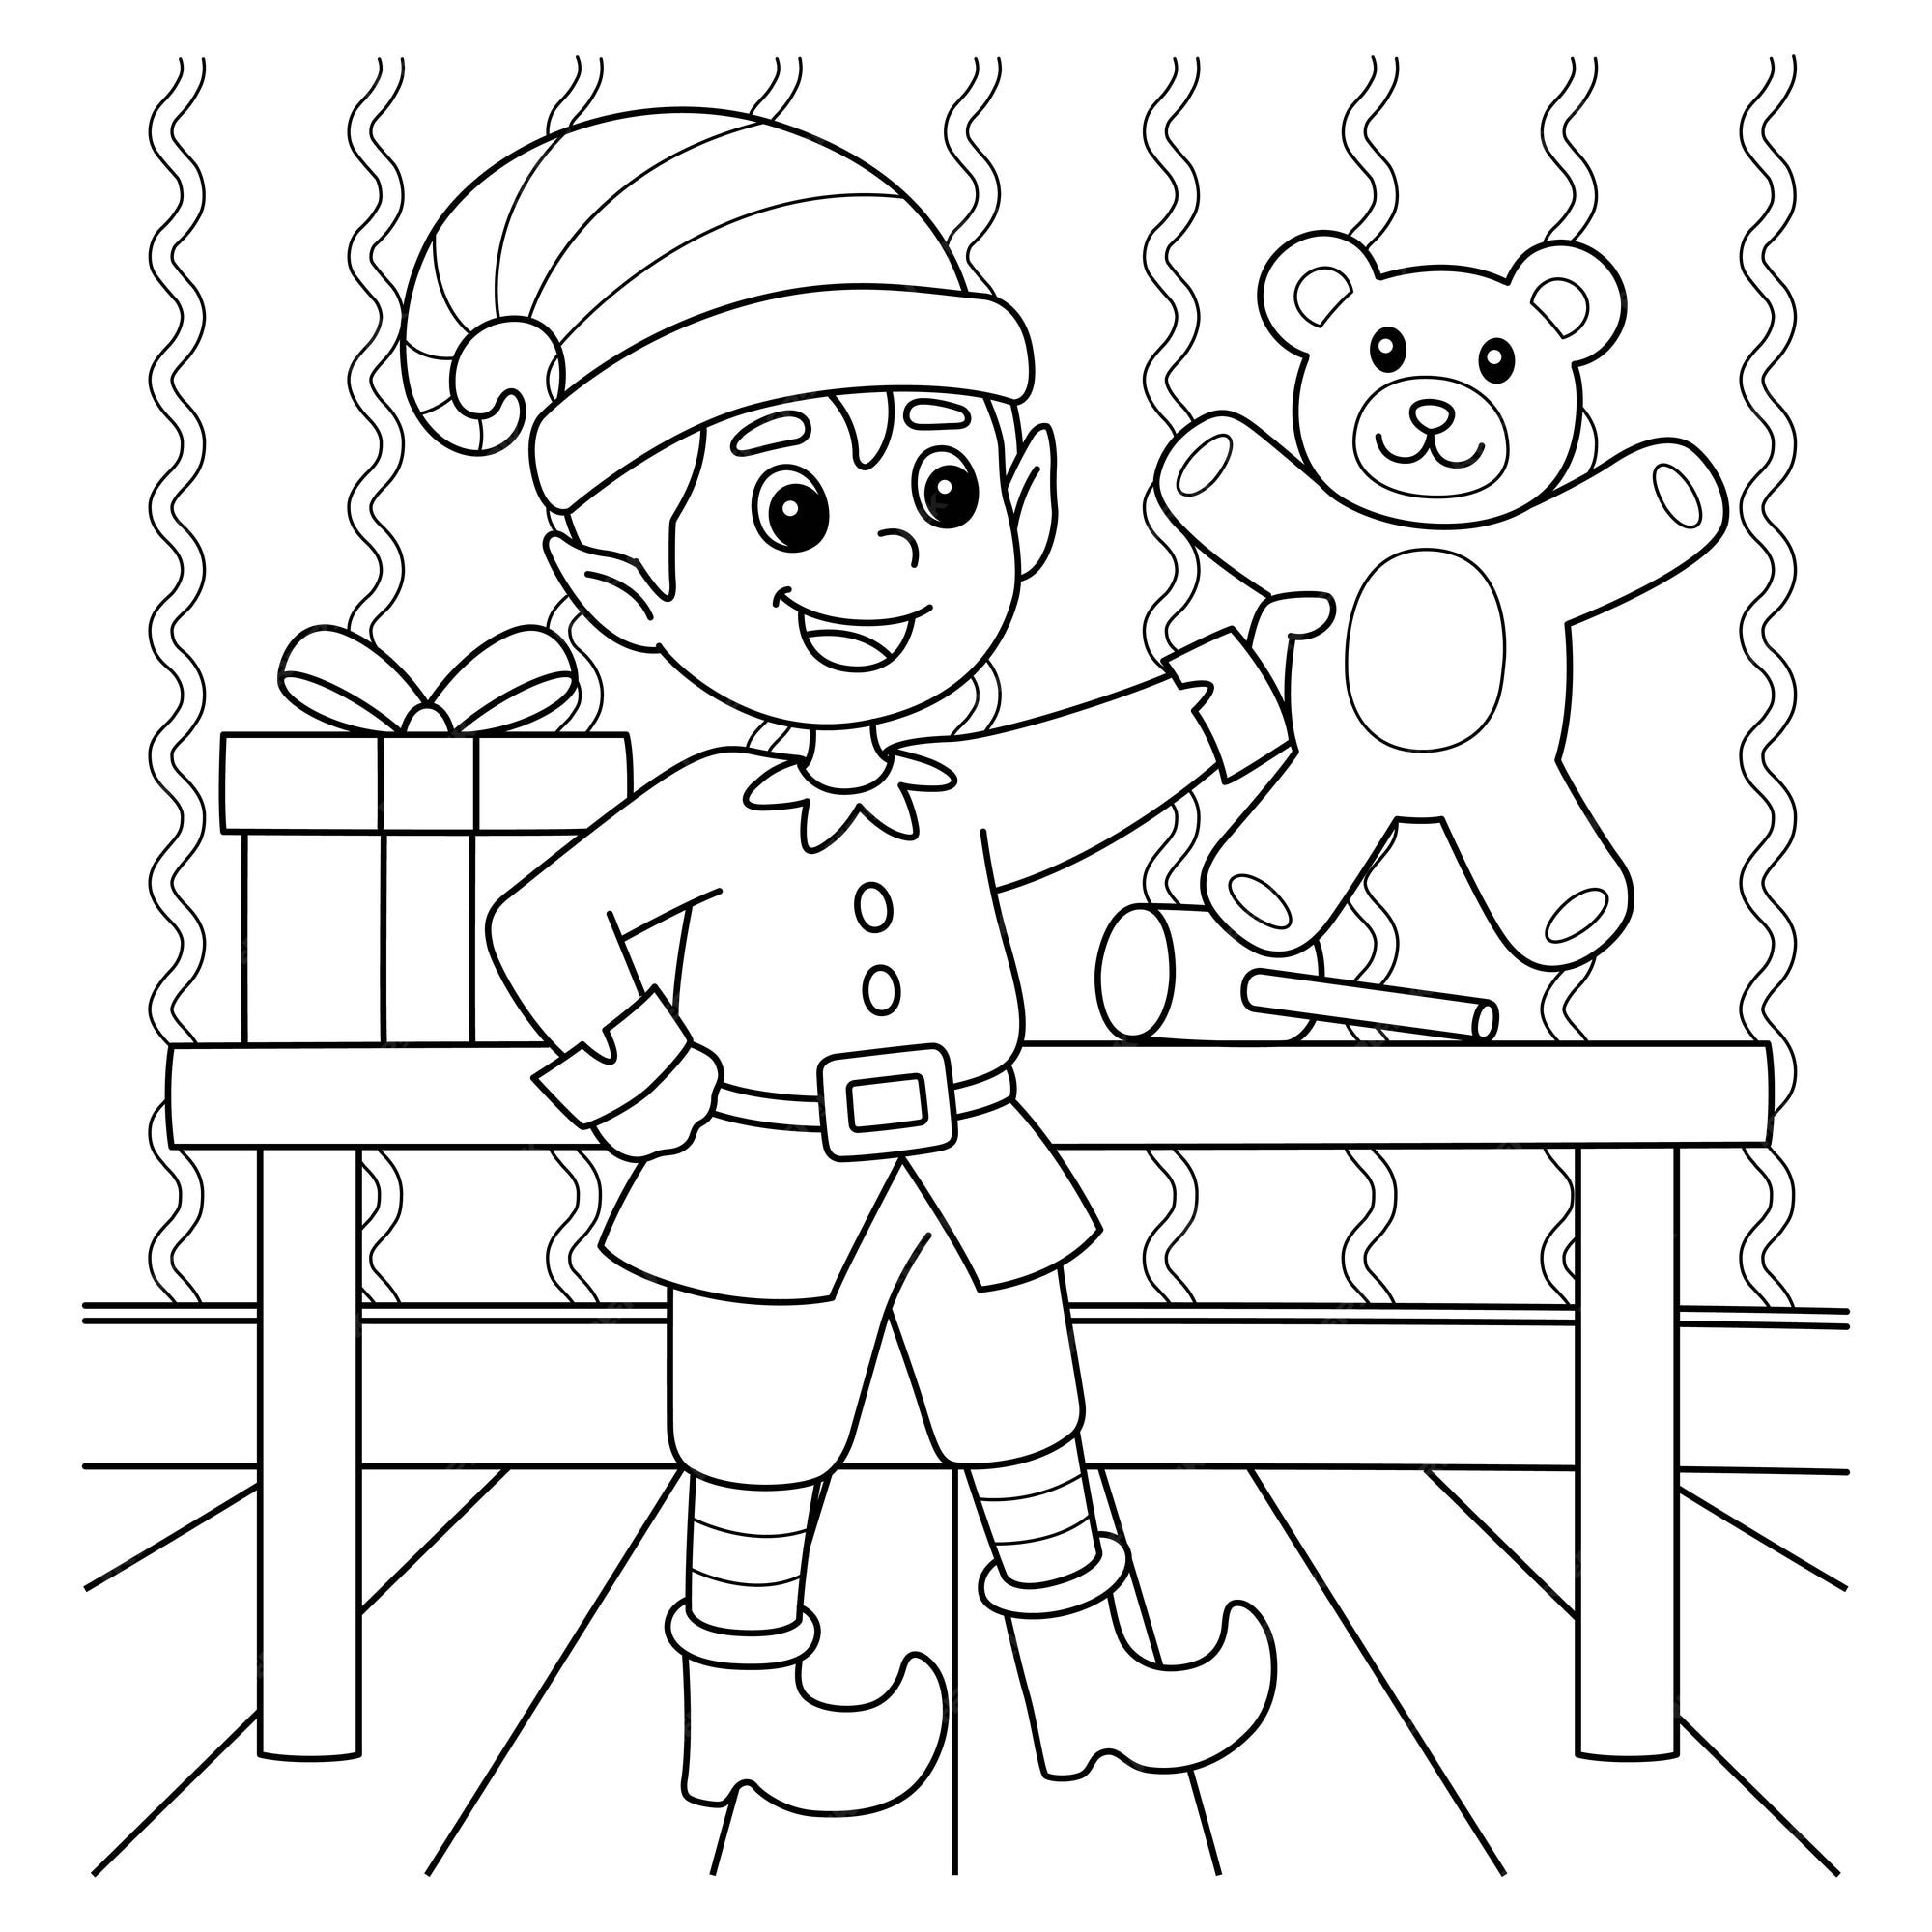 Premium vector christmas elf coloring page for kids